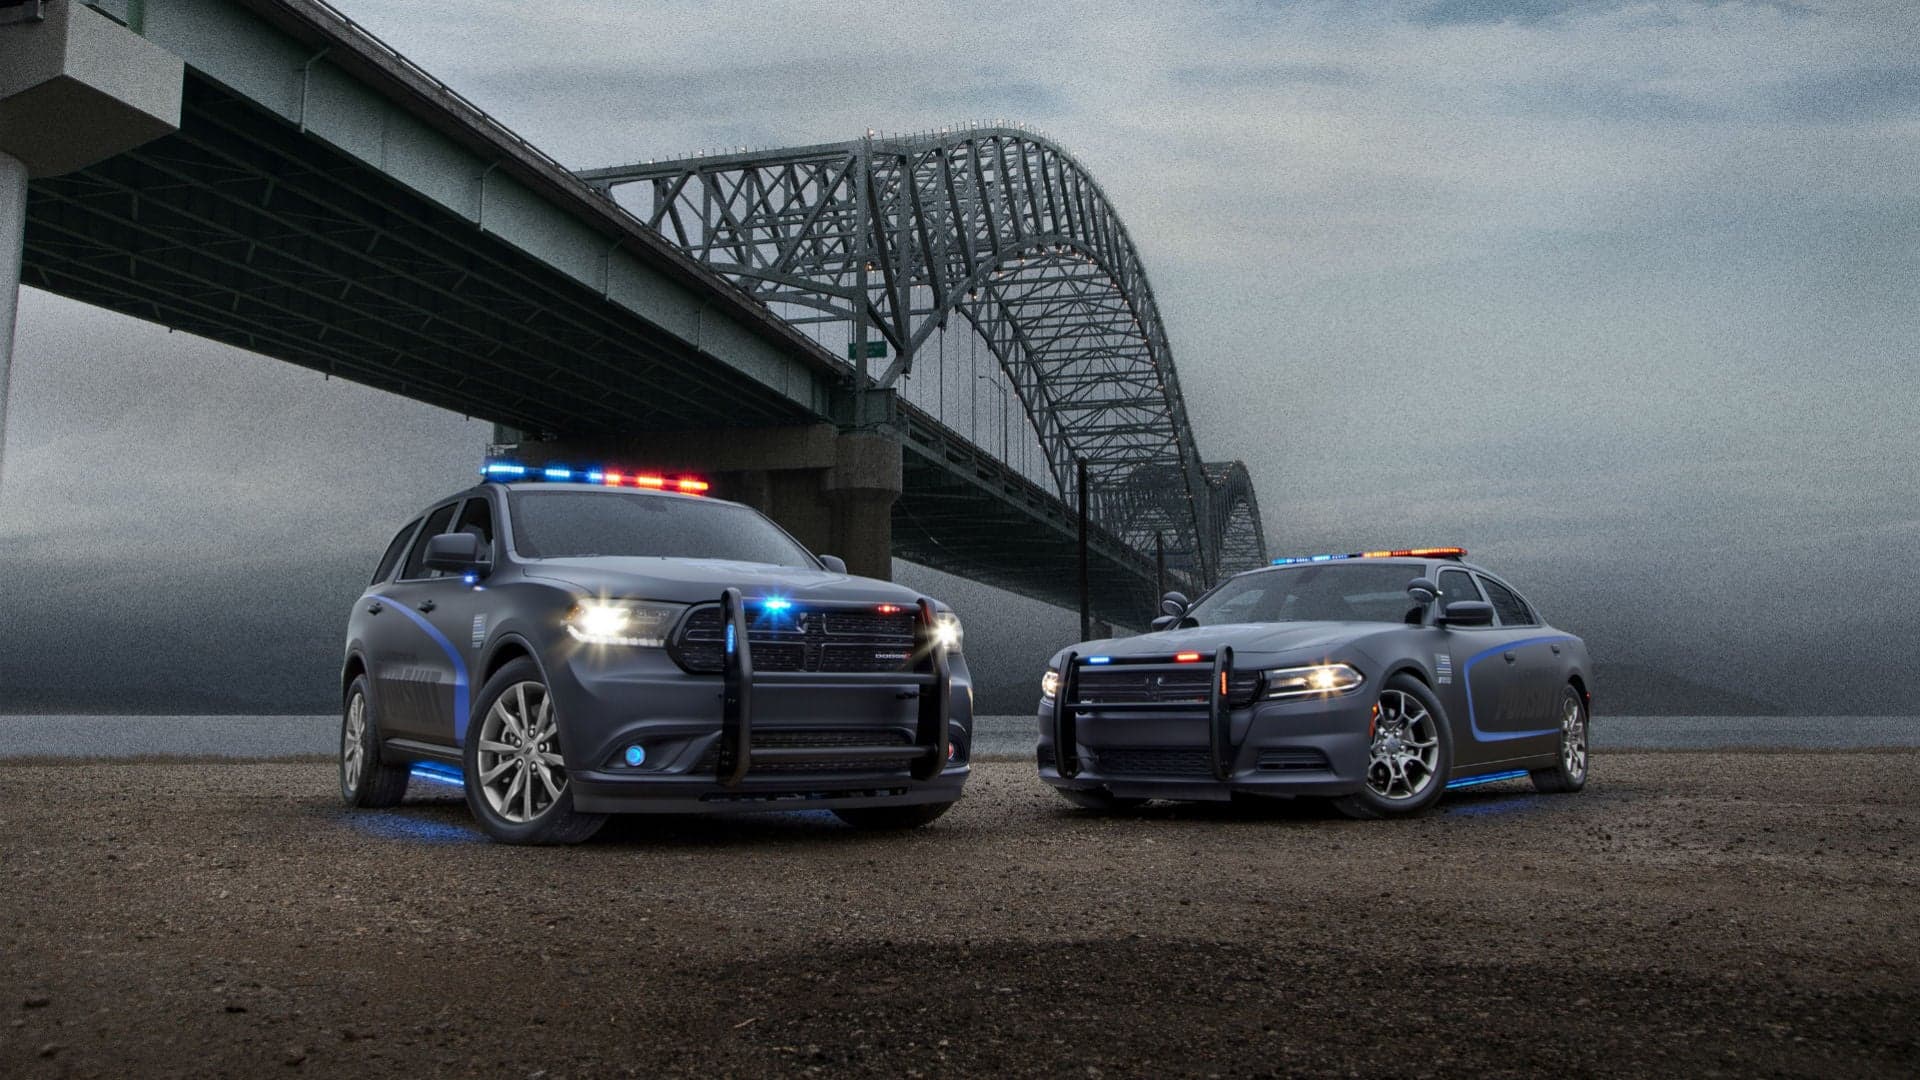 Dodge Adds to Police Department Arsenals with Durango Pursuit Vehicles